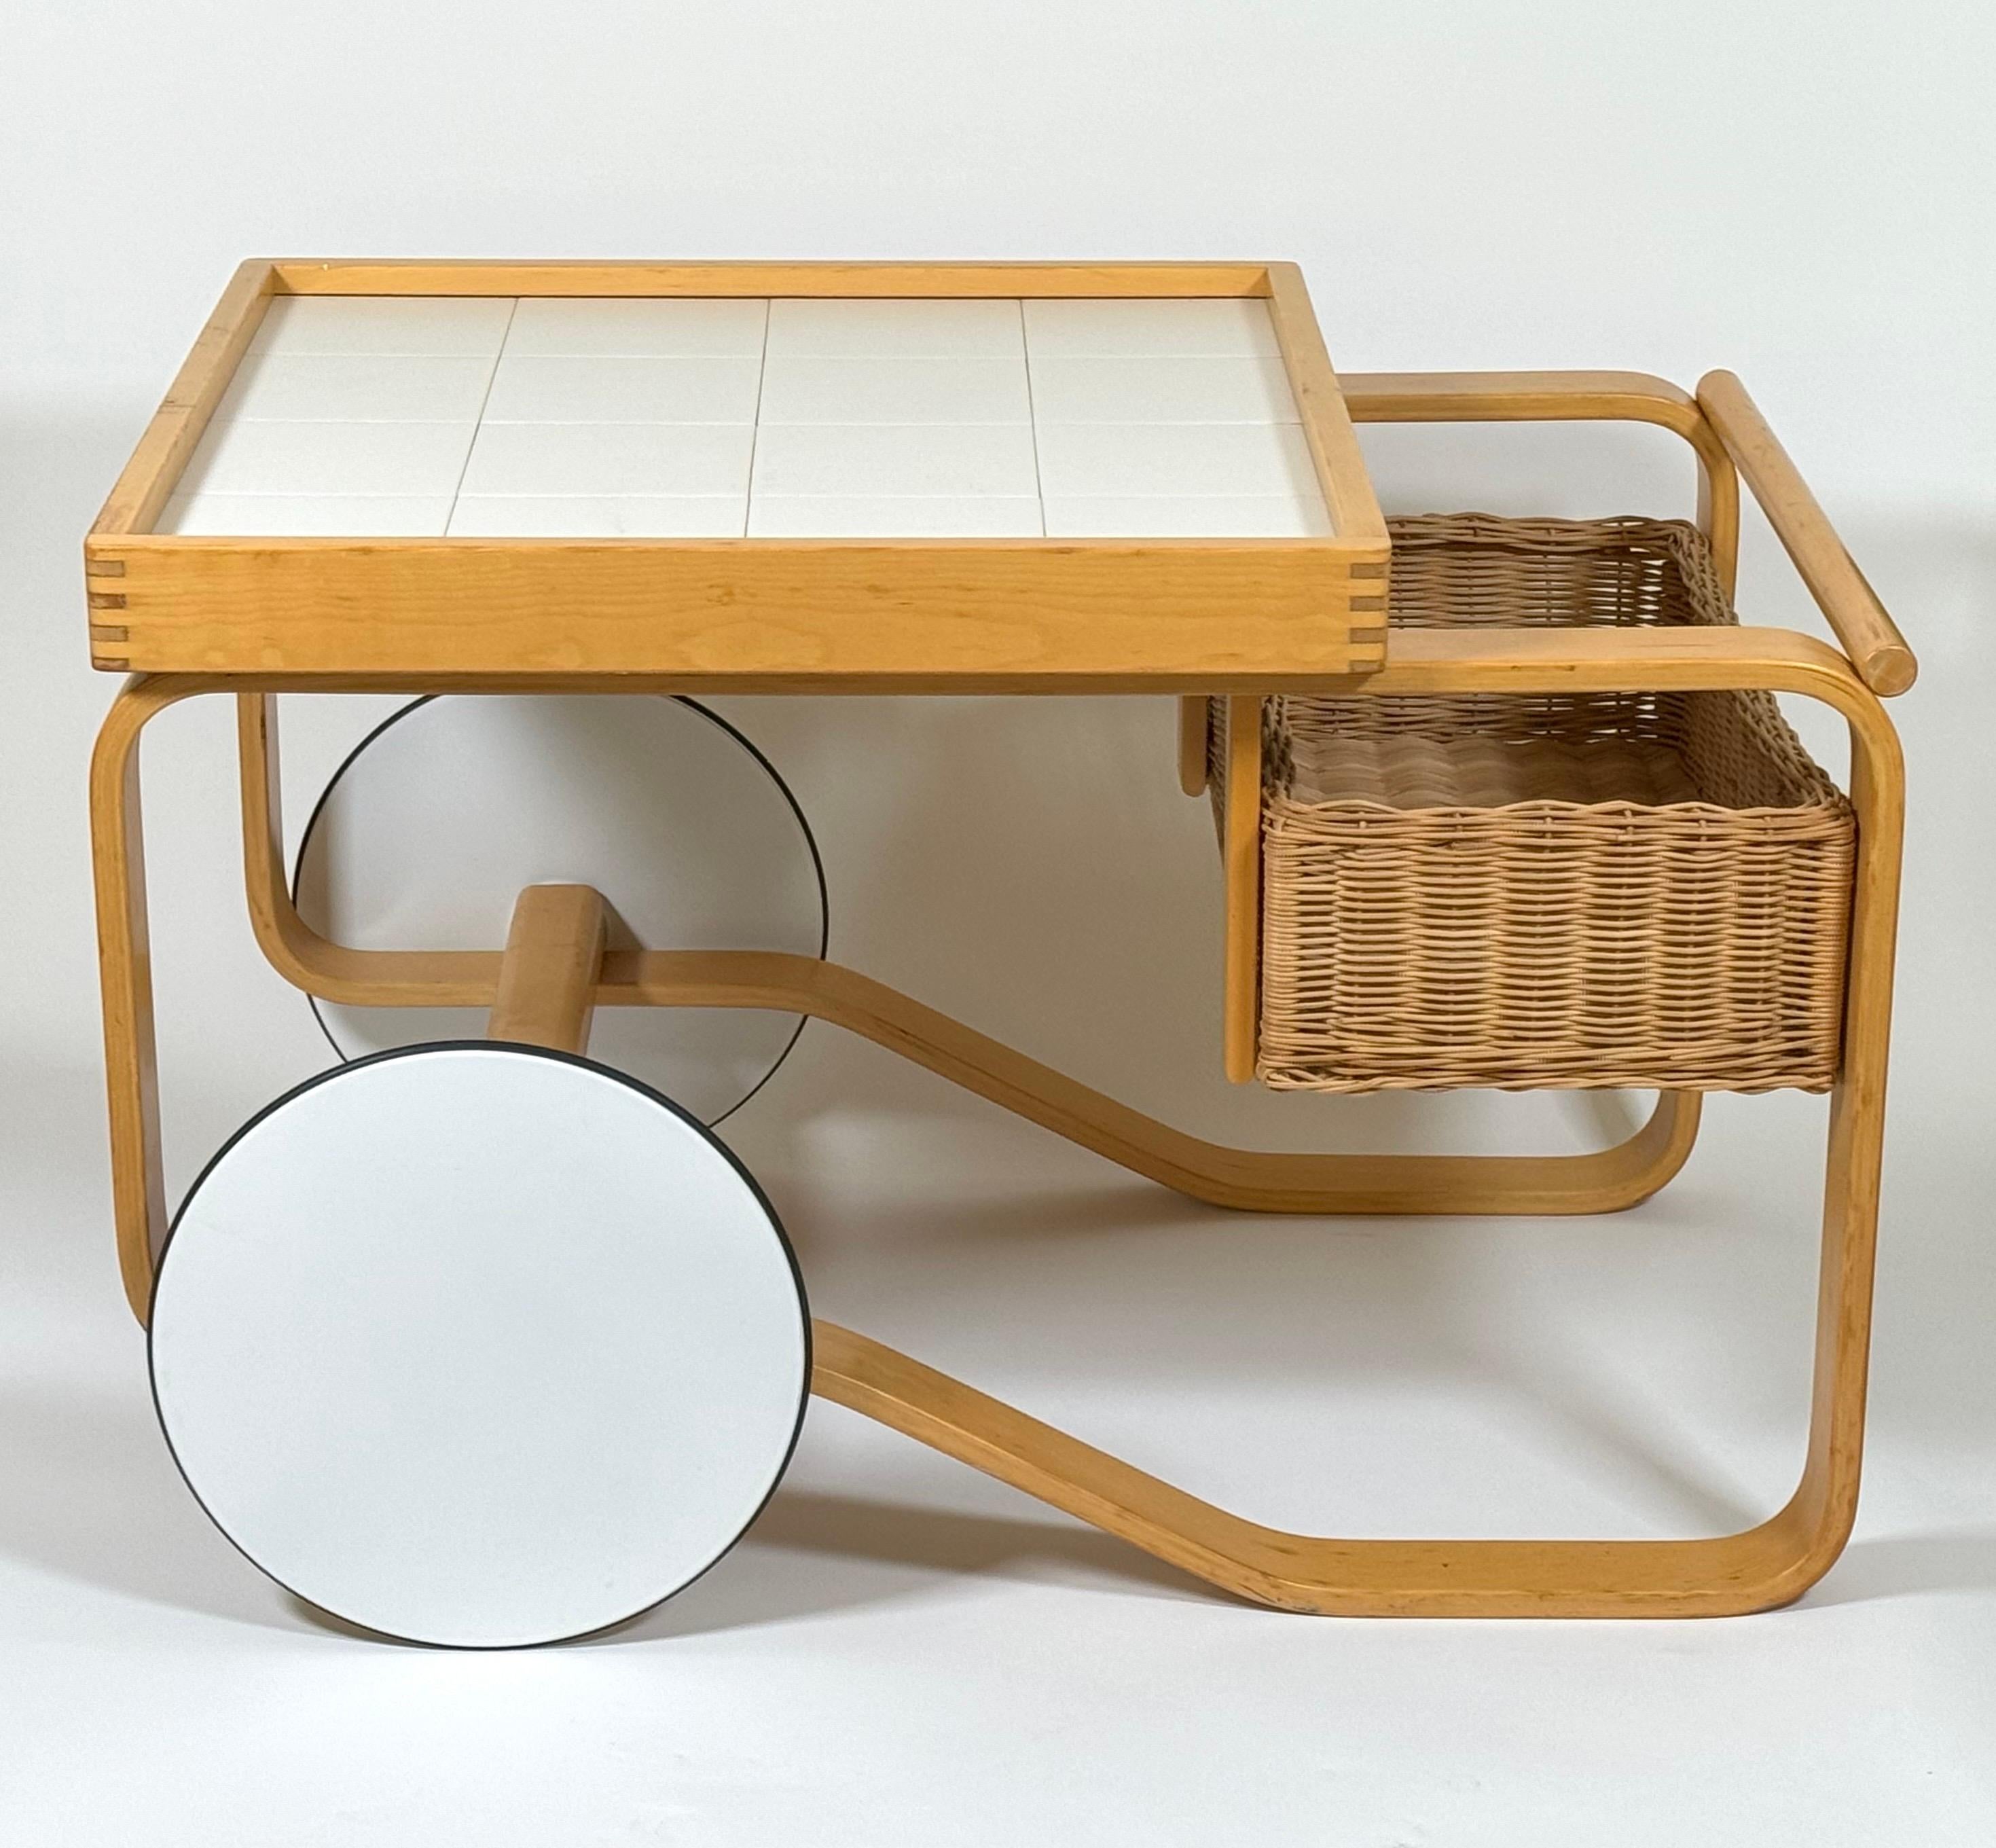 The Alvar and Aino Aalto 900 Trolley Tea / Bar Cart, originally designed in 1937, this is a 1980s production piece. Having a white ceramic tile top with a rattan basket on a bent wood birch frame with white lacquered and rubber edged wheels. The